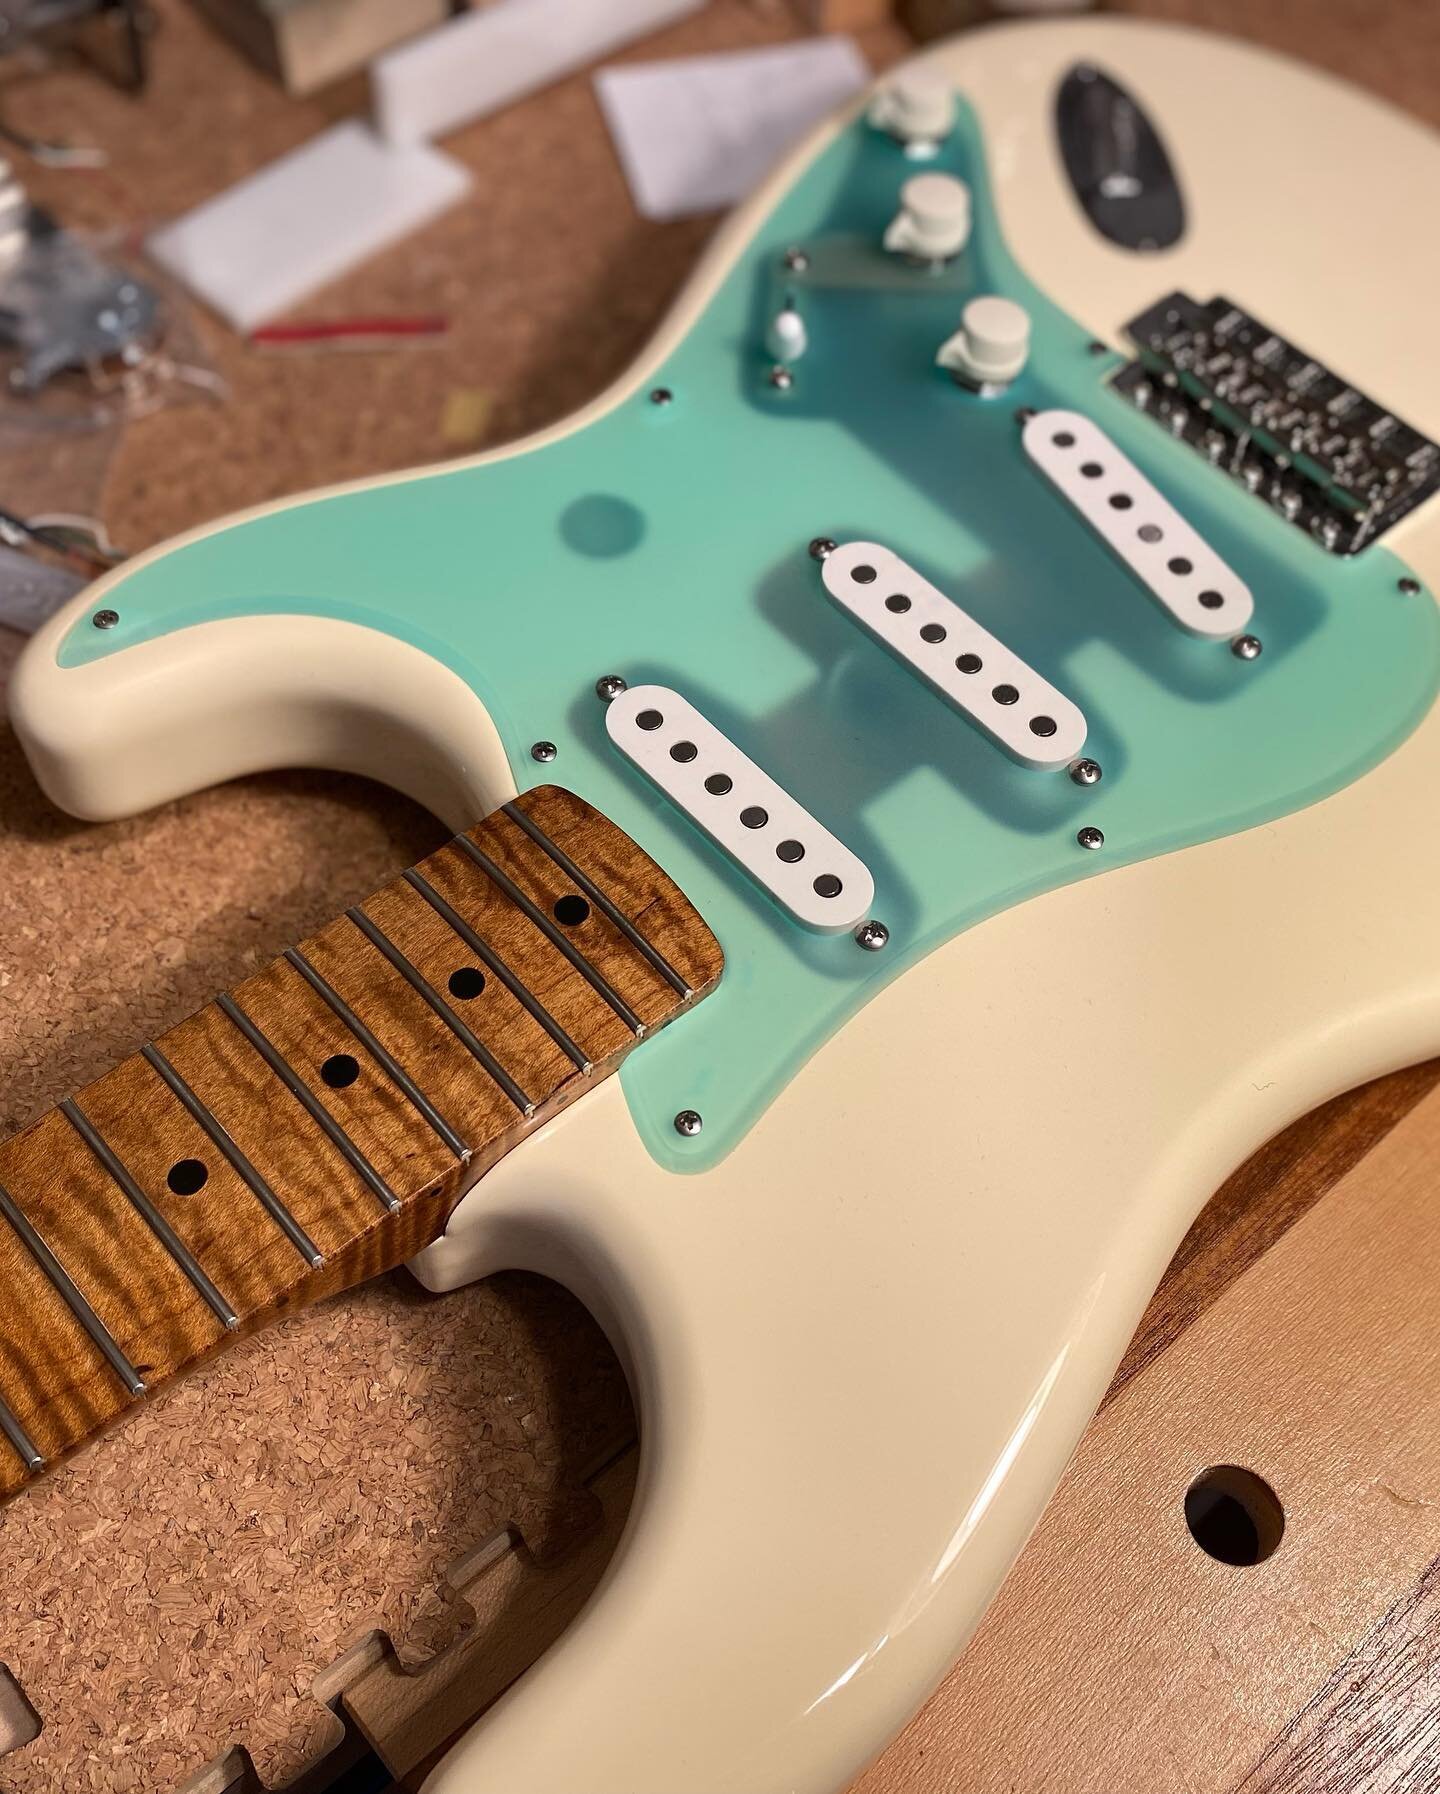 This is getting out of control 🥵
:
.
:
.
:
.
:
.
:
#guitar #luthier #stratocaster #customguitar #roastedmaple #sexy #lollarpickups #soundguitarworks #seattleluthier